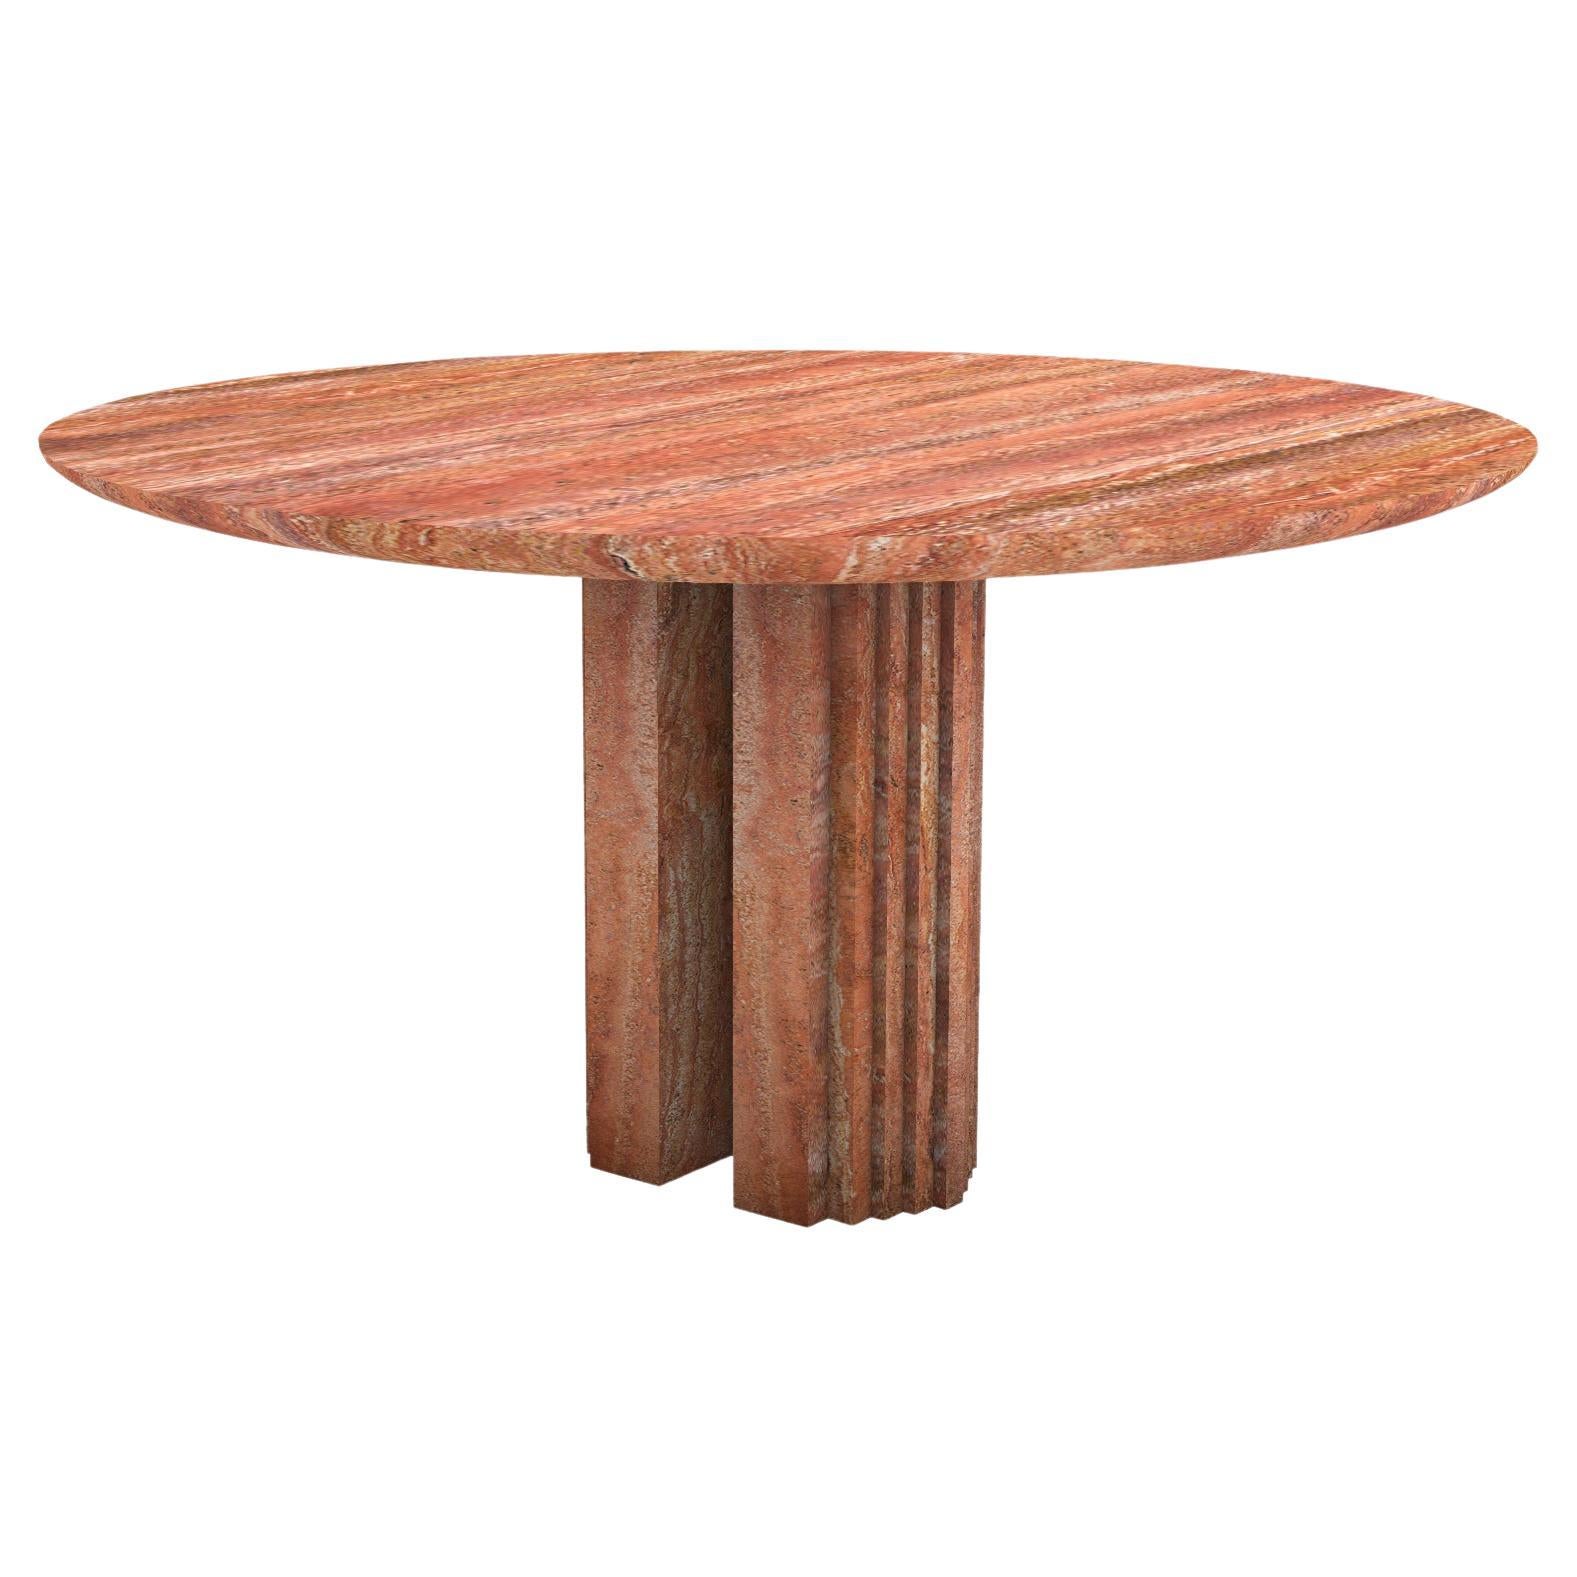 Dining table 0024c in Travertine Red by artist Desia Ava For Sale